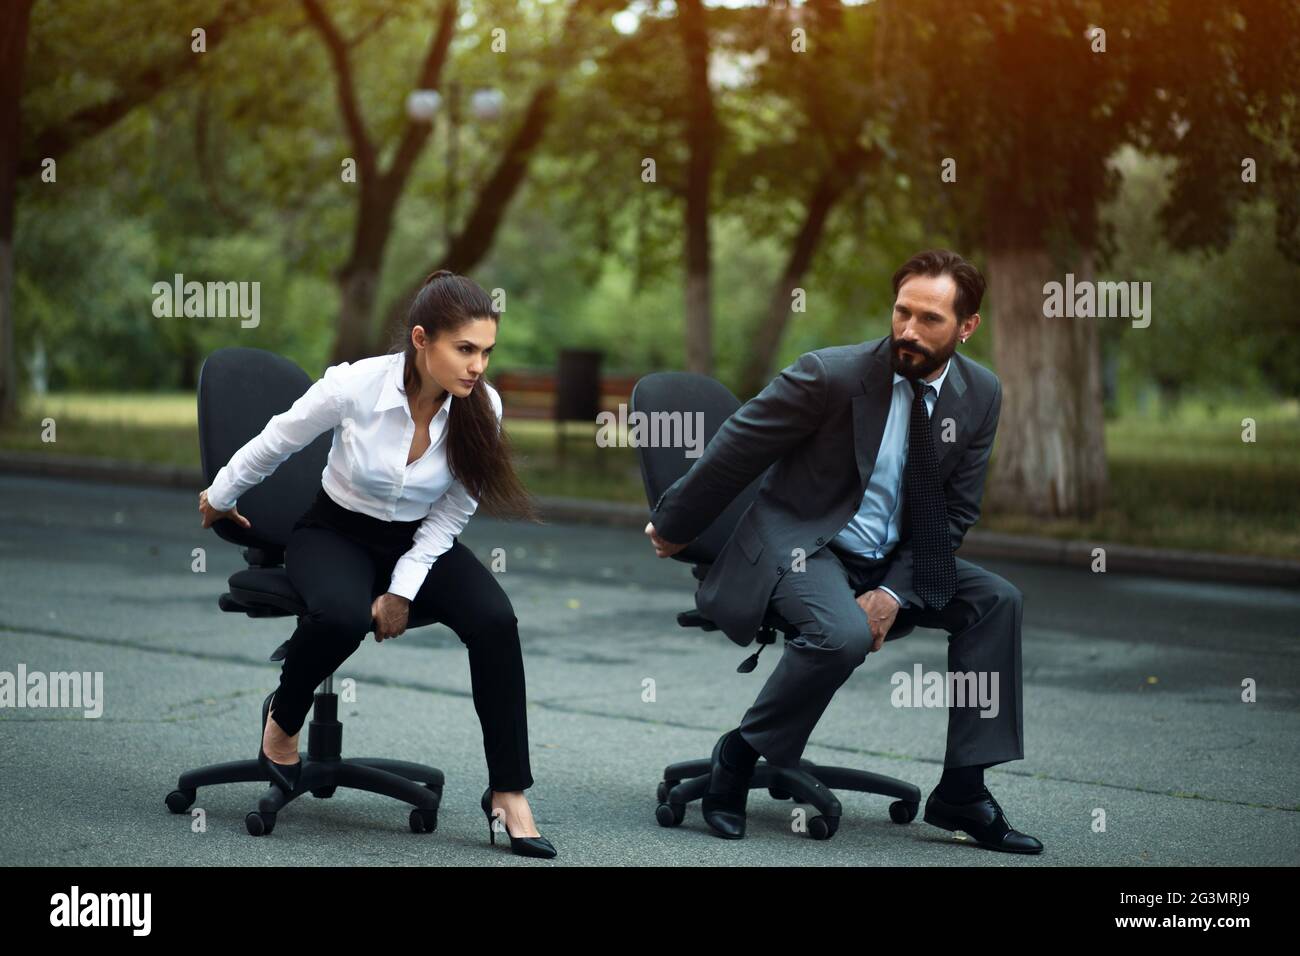 Businesspeople having racing on office chairs Stock Photo